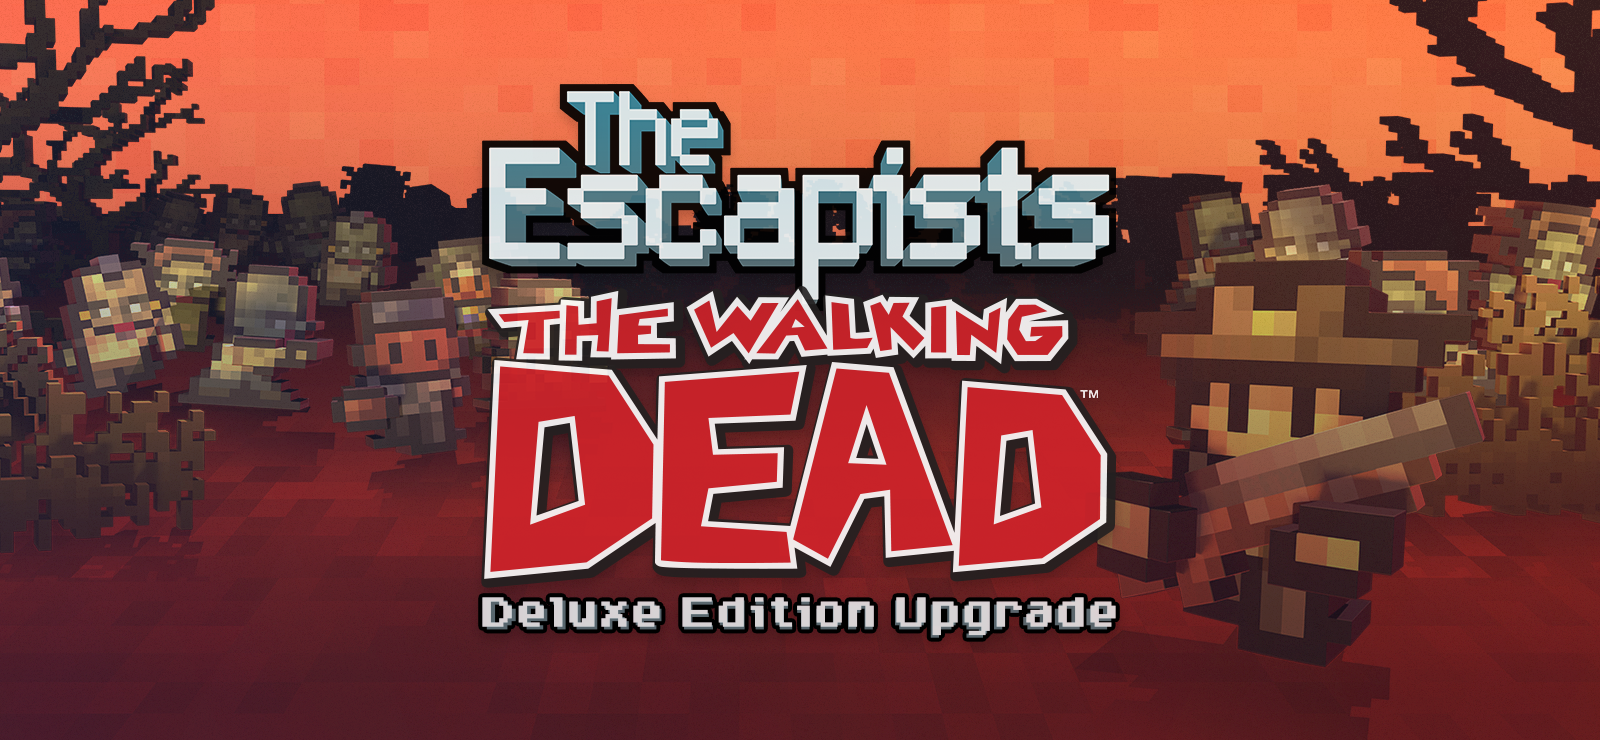 The Escapists: The Walking Dead - Deluxe Edition Upgrade